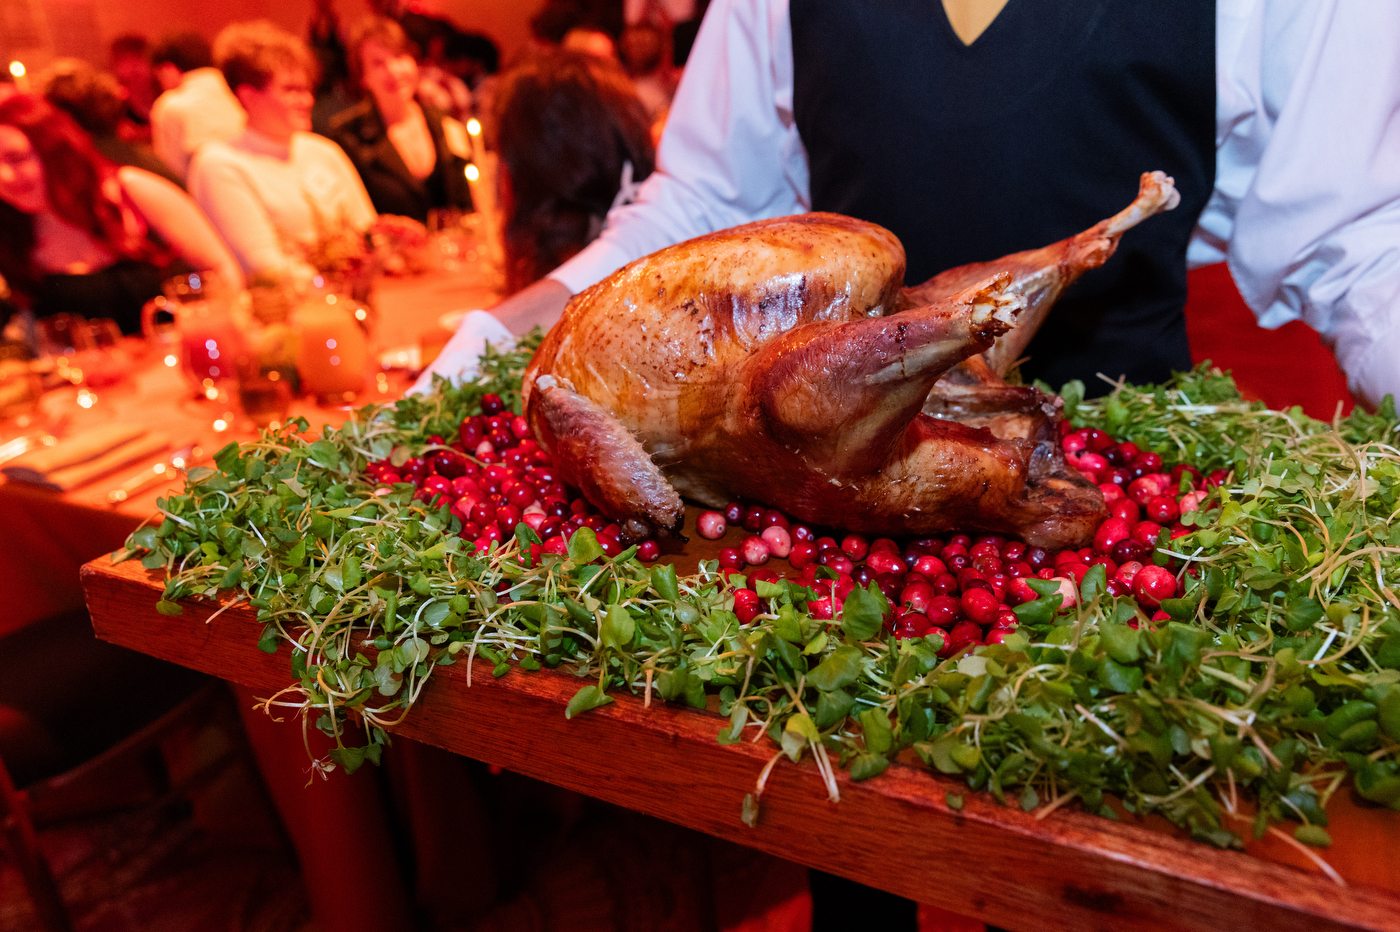 A giant turkey is displayed on a cutting board, surrounded by cranberries and garnish.